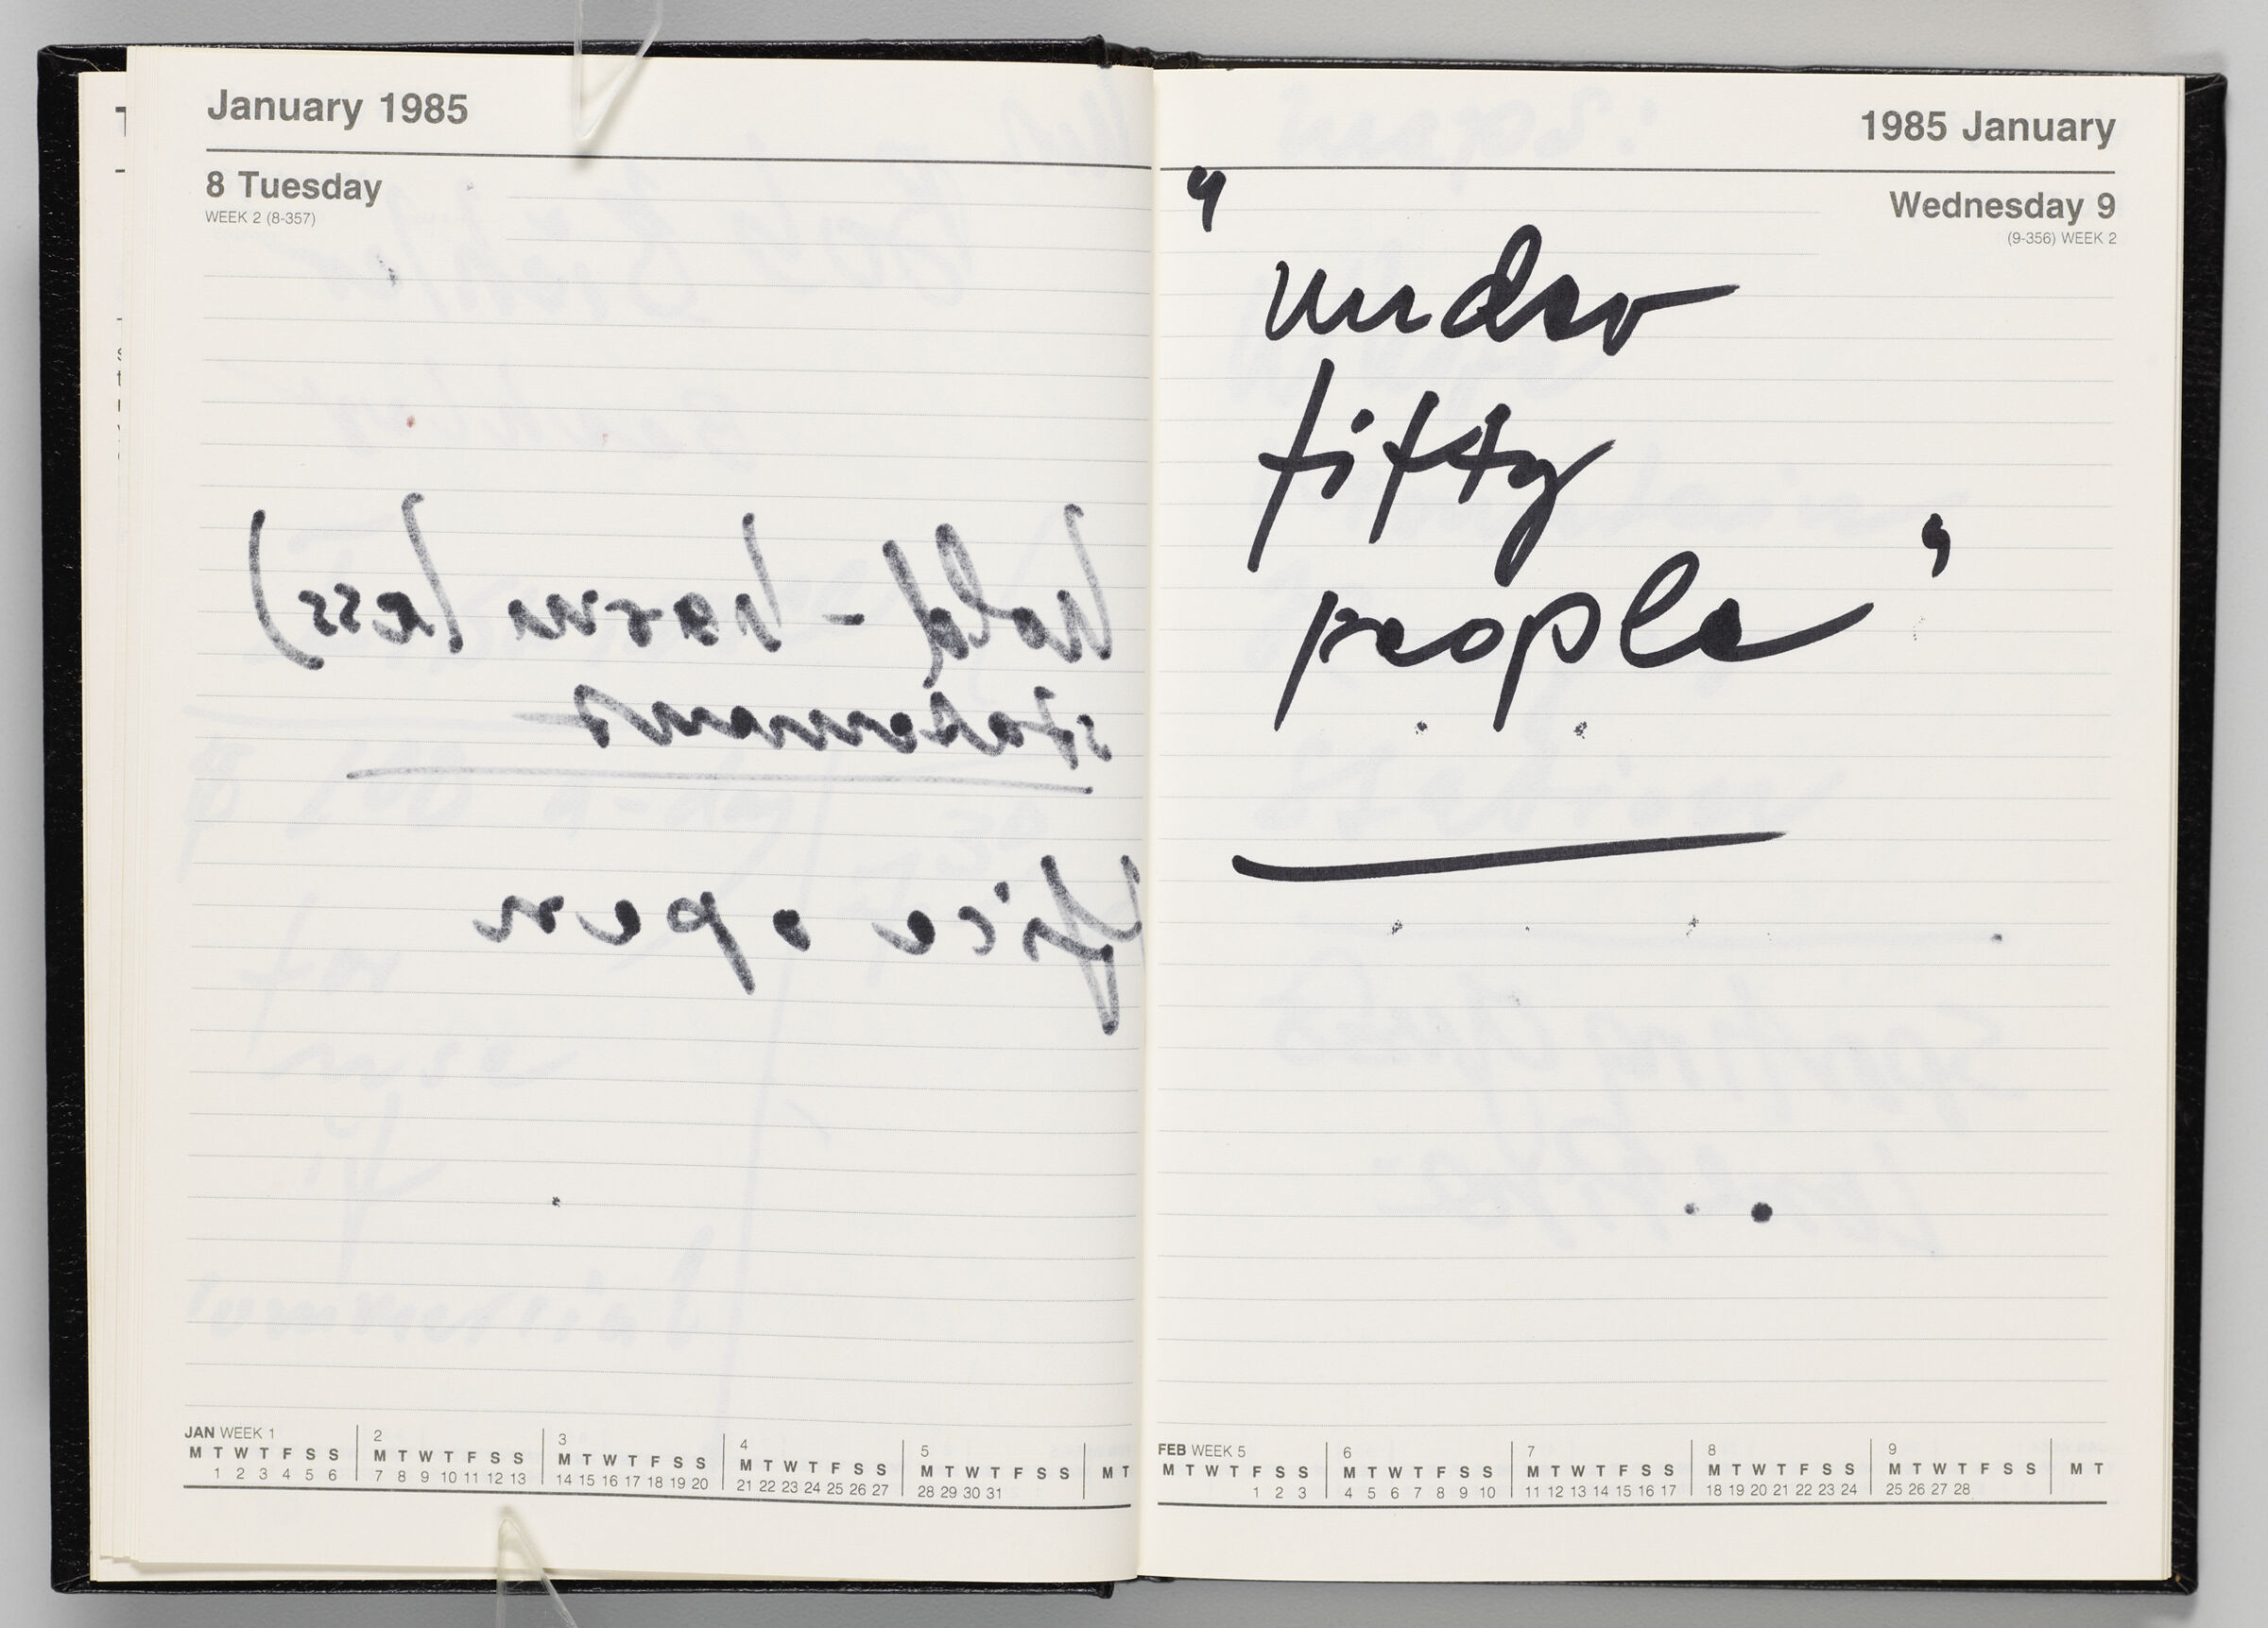 Untitled (Bleed-Through Of Previous Page, Left Page); Untitled (Notes On Calendar Page January 9, 1985, Right Page)